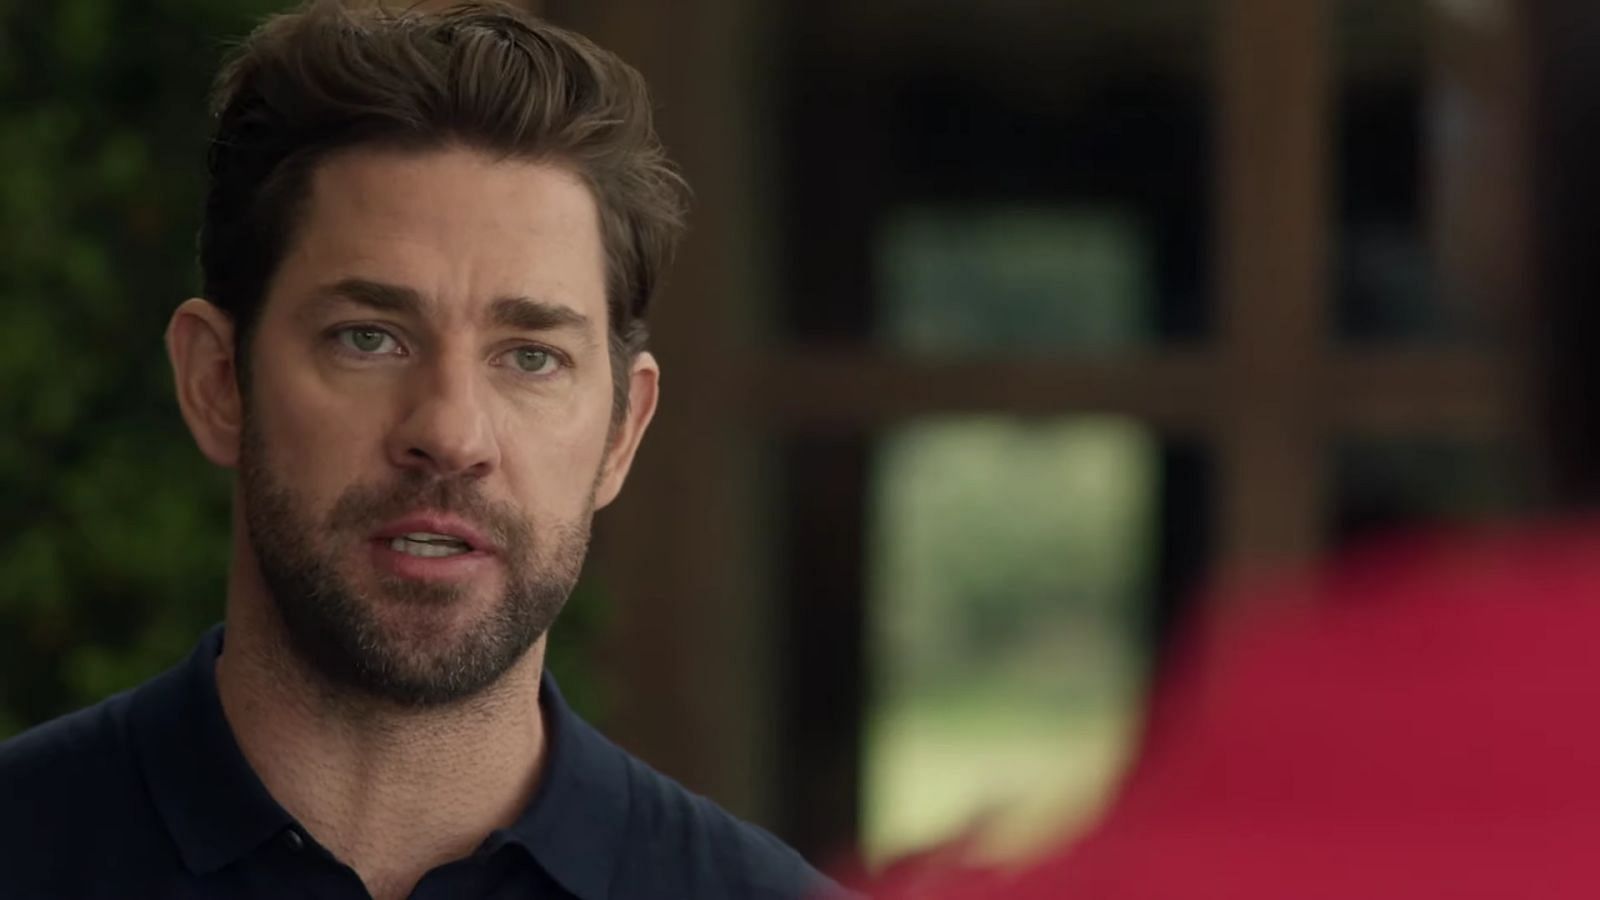 Where Can You Watch Jack Ryan?